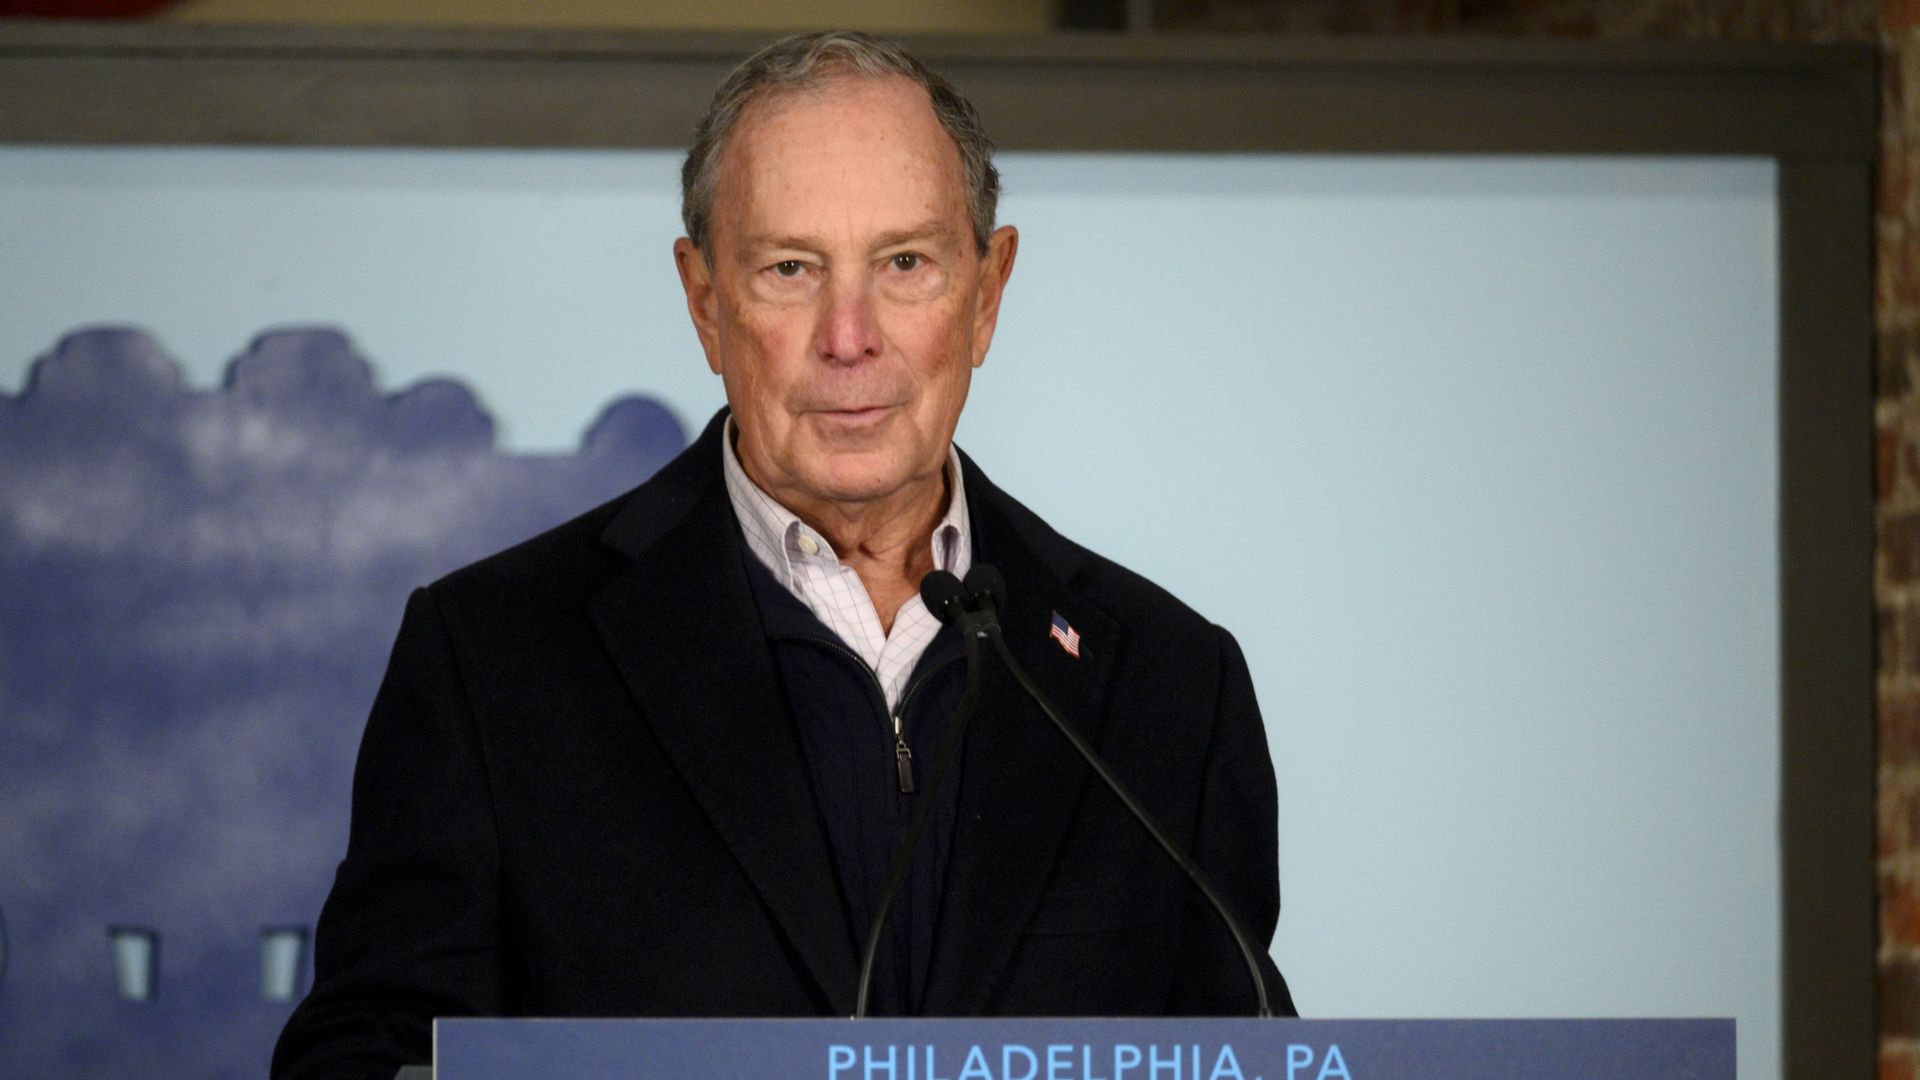 Mike Bloomberg campaigning in Philadelphia